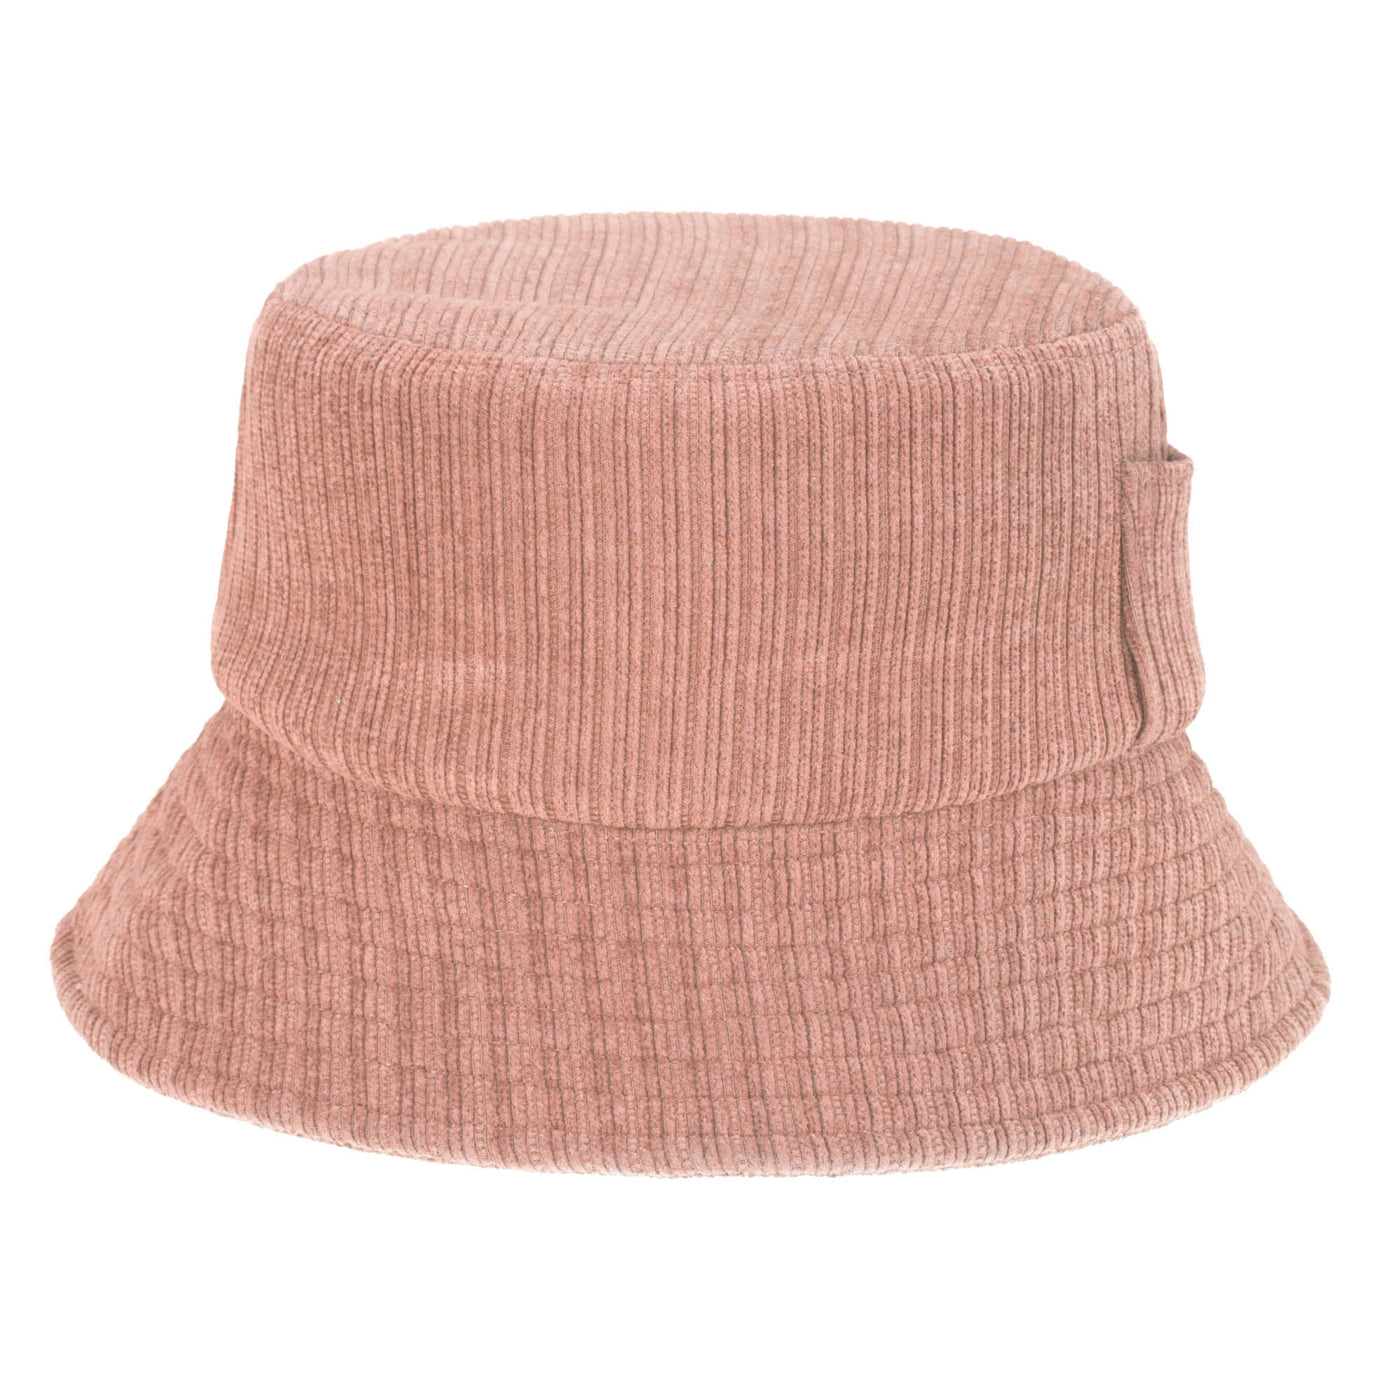 Company Chic Hat Cozy San – Diego and Bucket Women\'s Hat